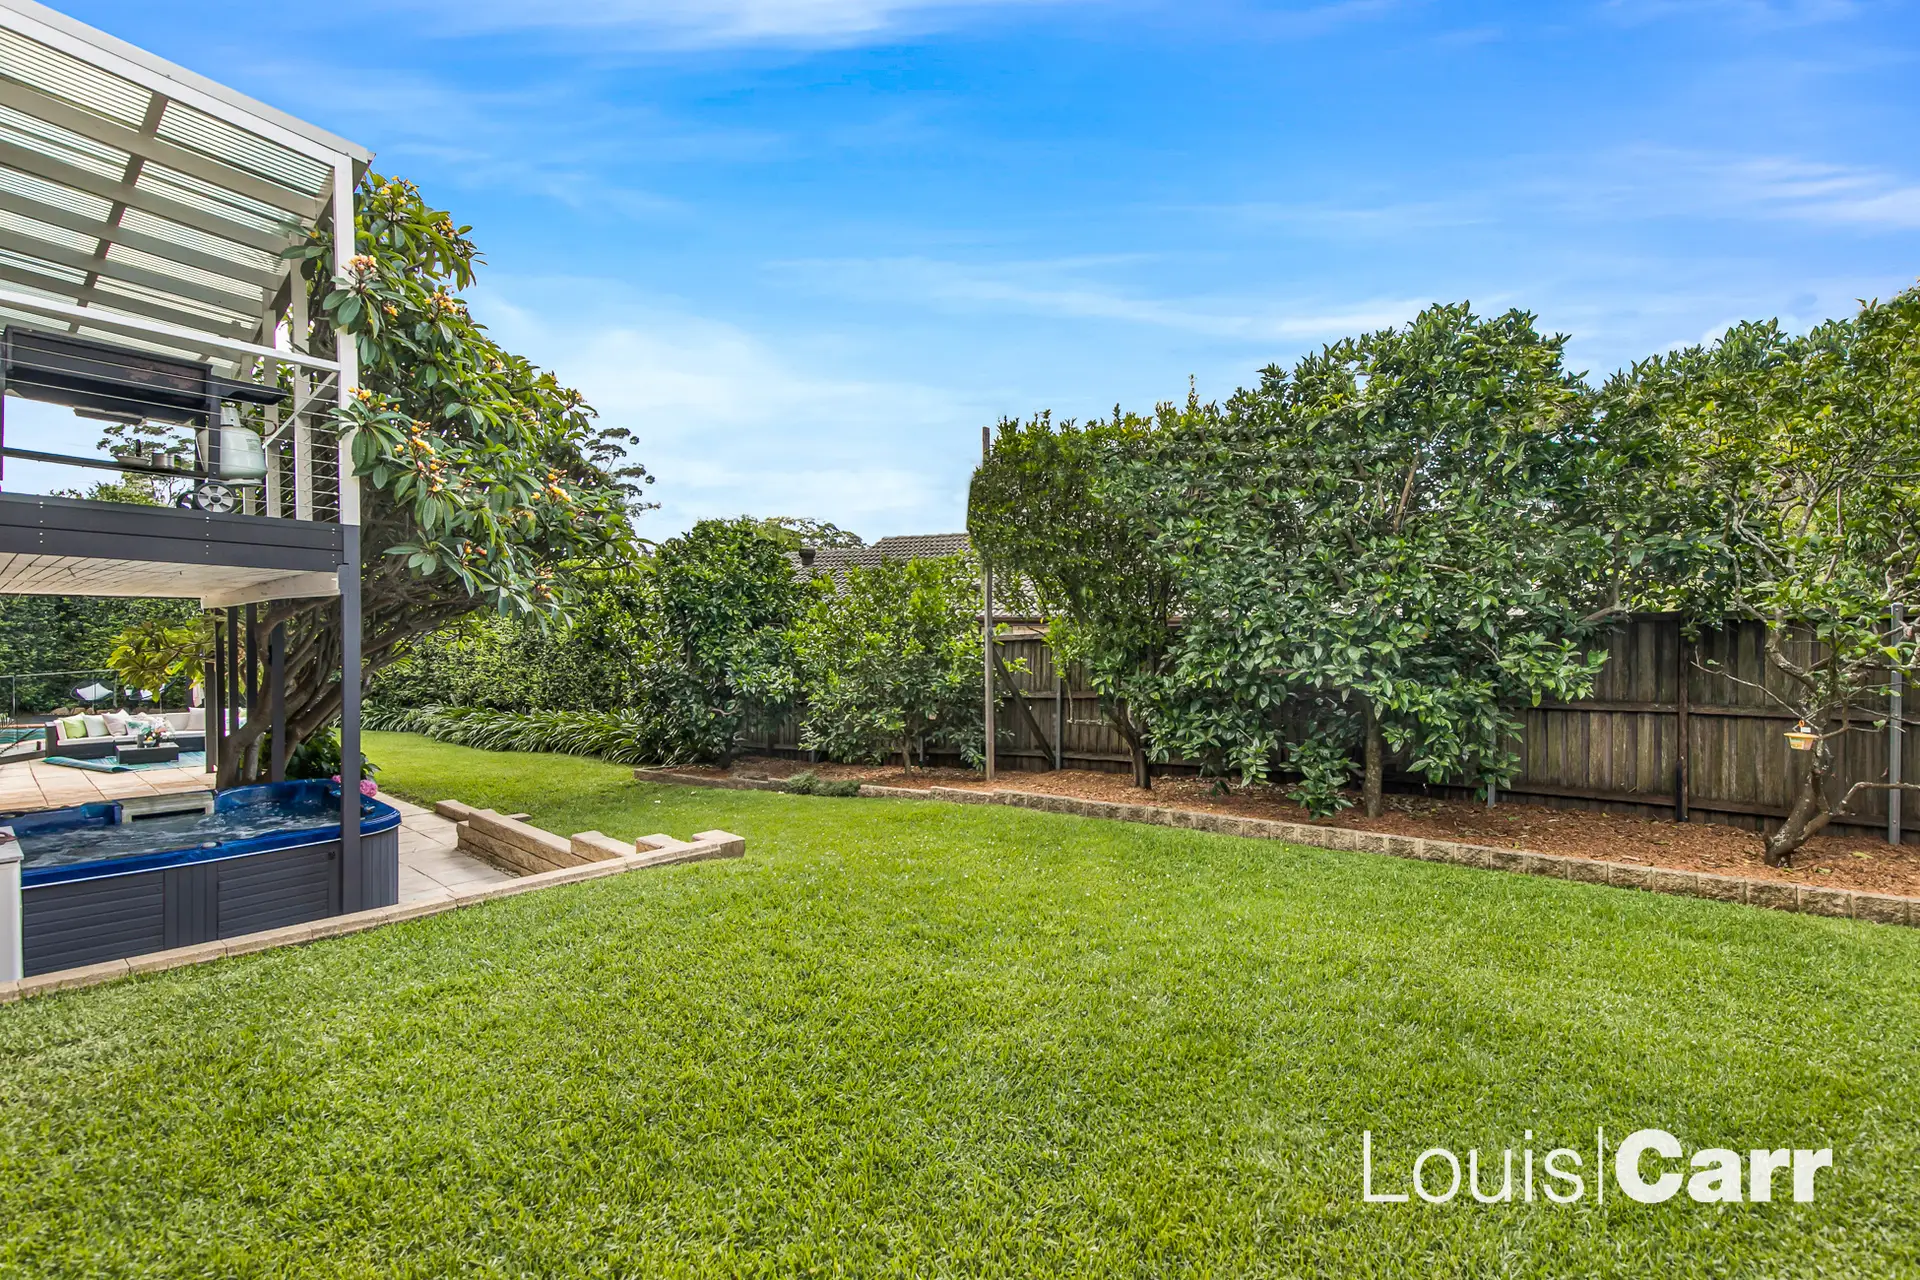 Photo #8: 14 Ivy Place, Cherrybrook - Sold by Louis Carr Real Estate